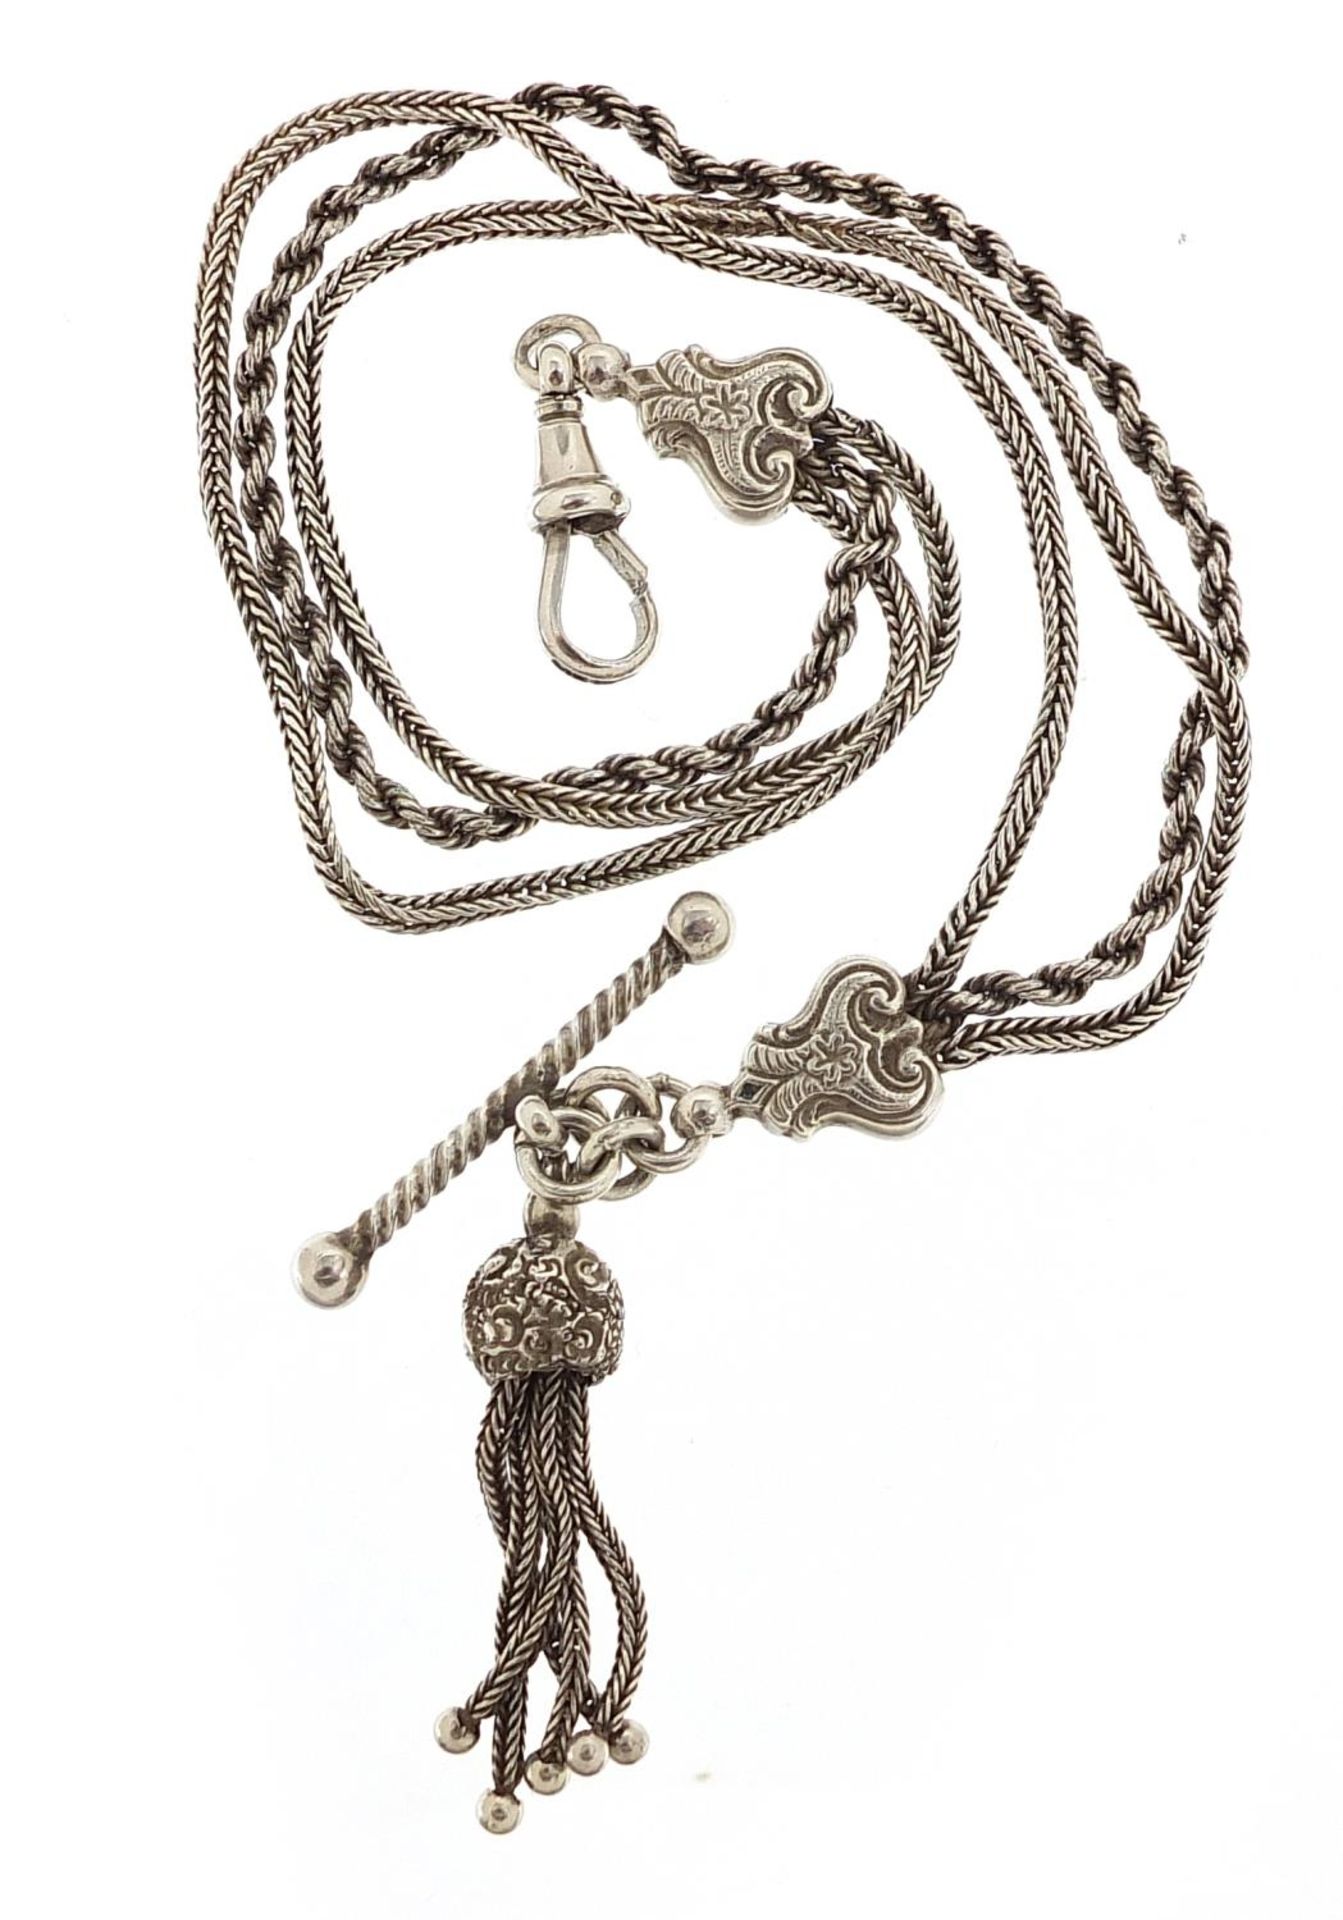 Victorian style sterling silver watch chain with T bar and tassel, 20cm in length, 18.0g